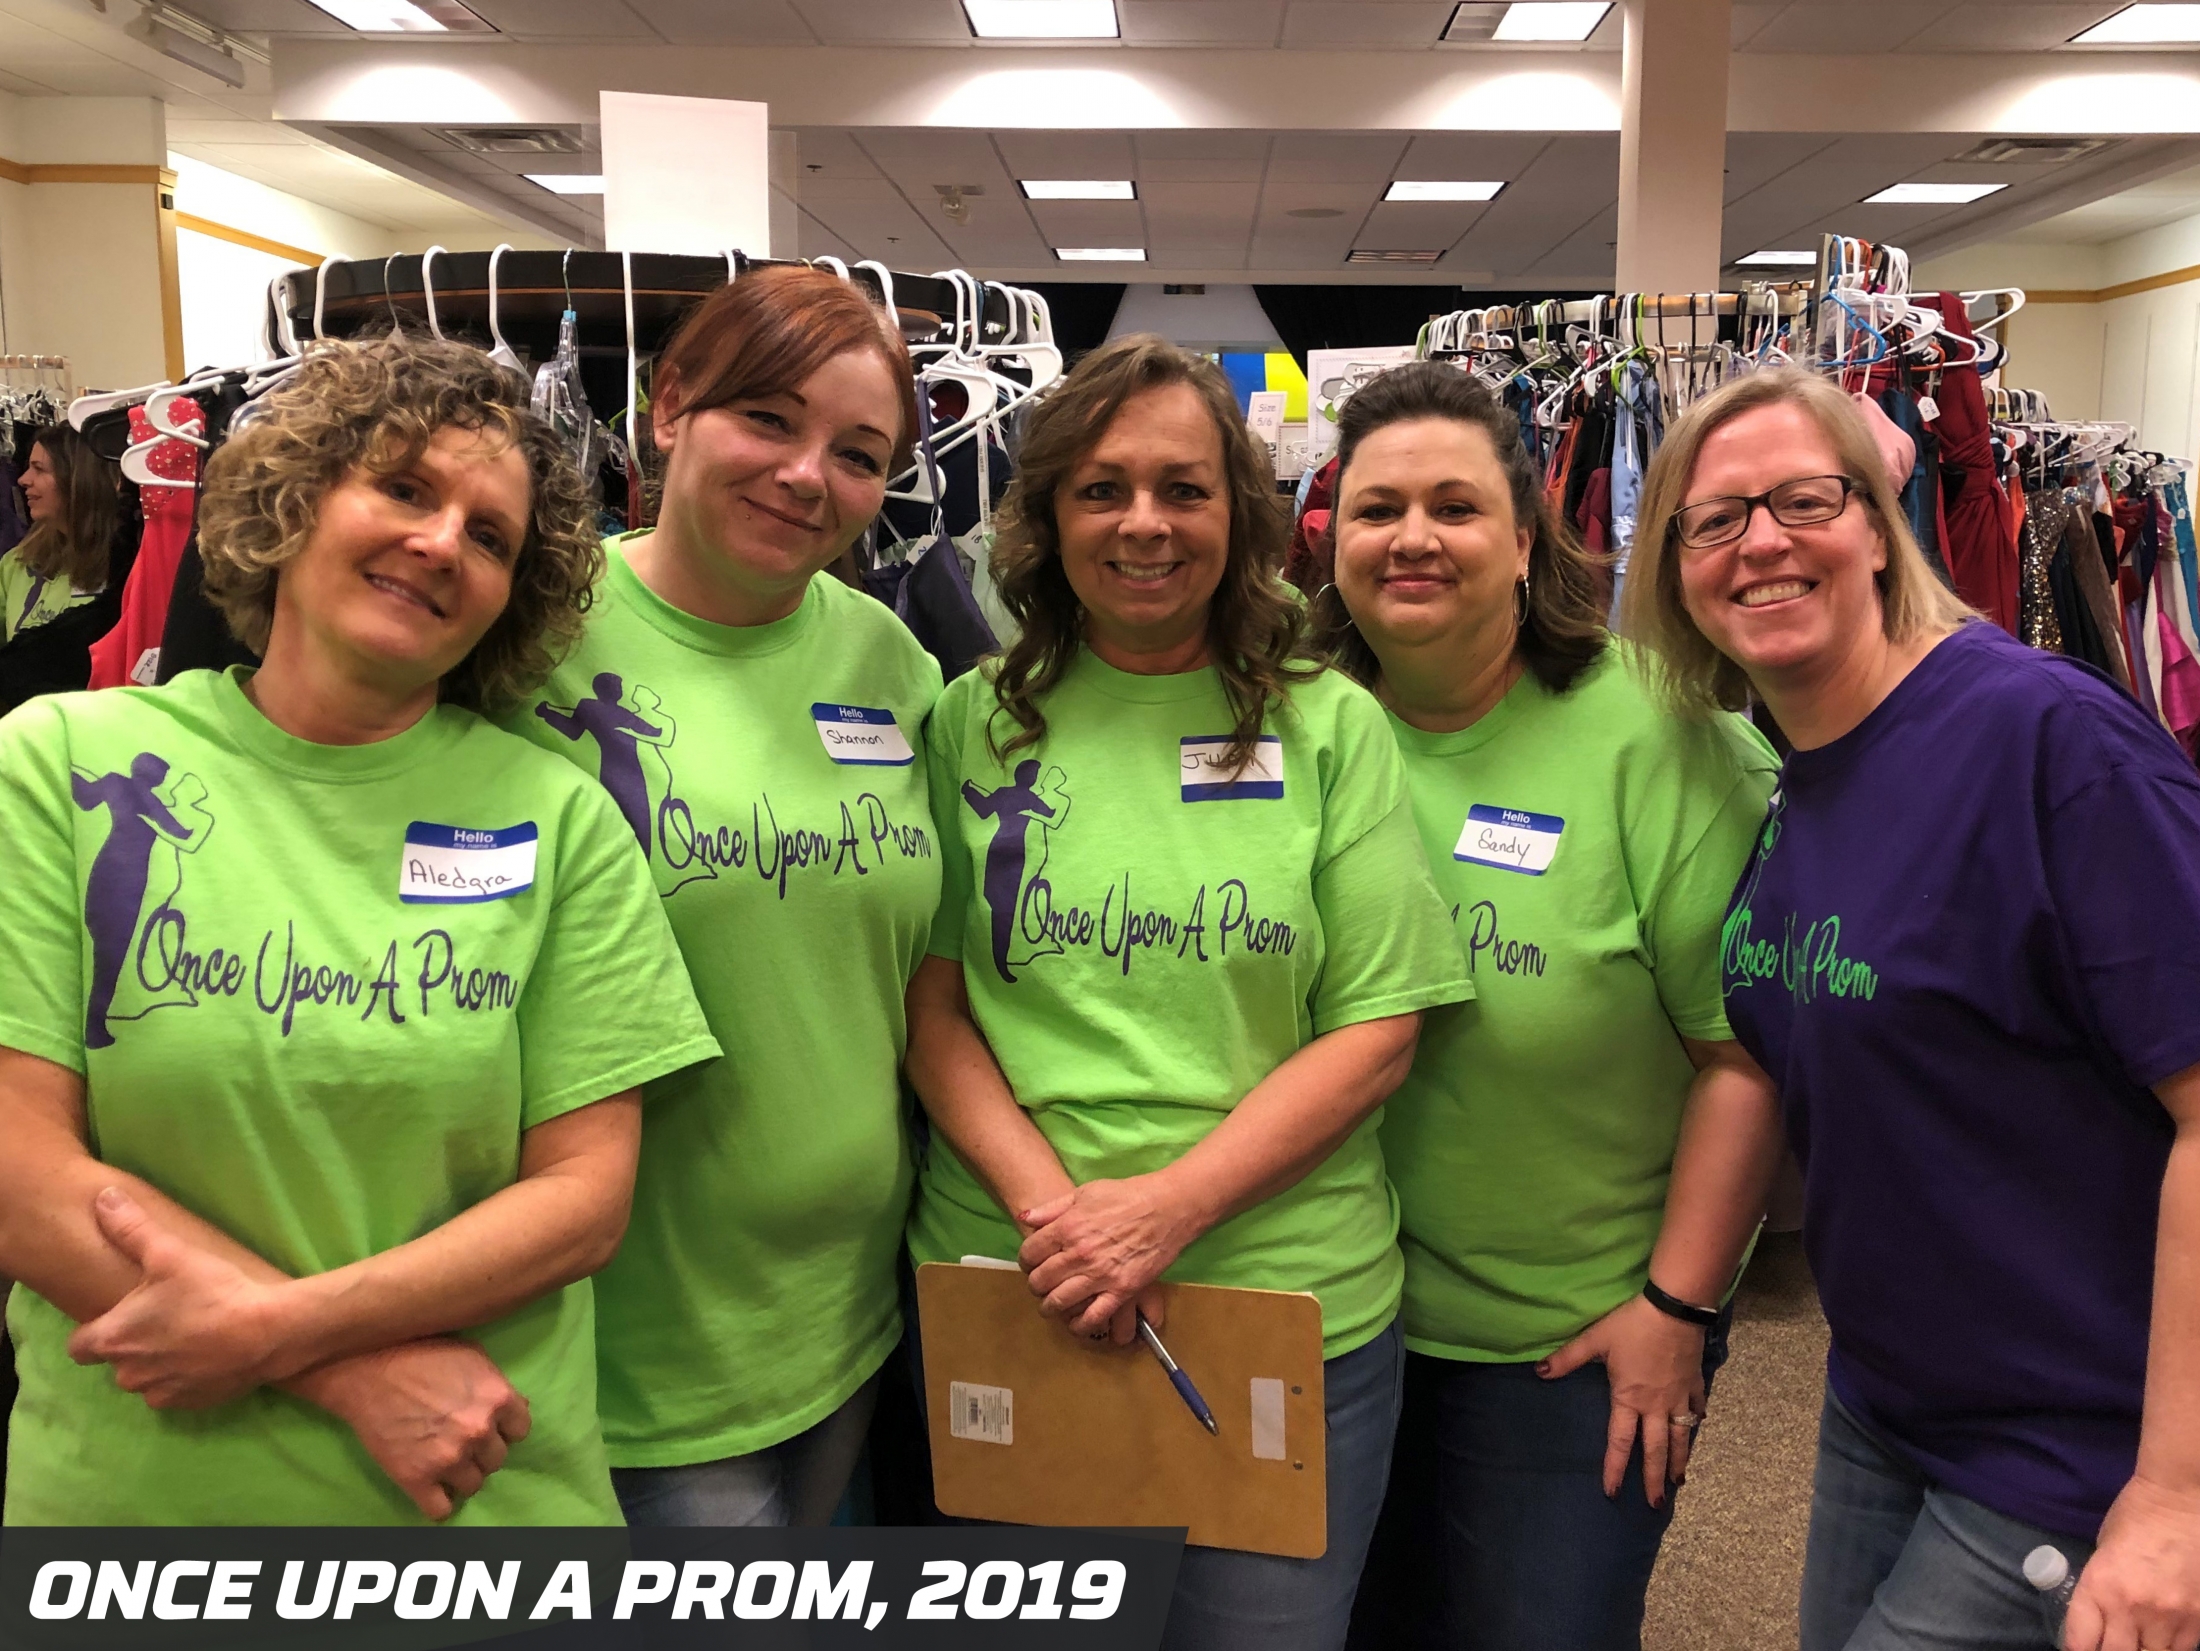 Precision Pipeline Community Involvement: Once Upon a Prom, 2019